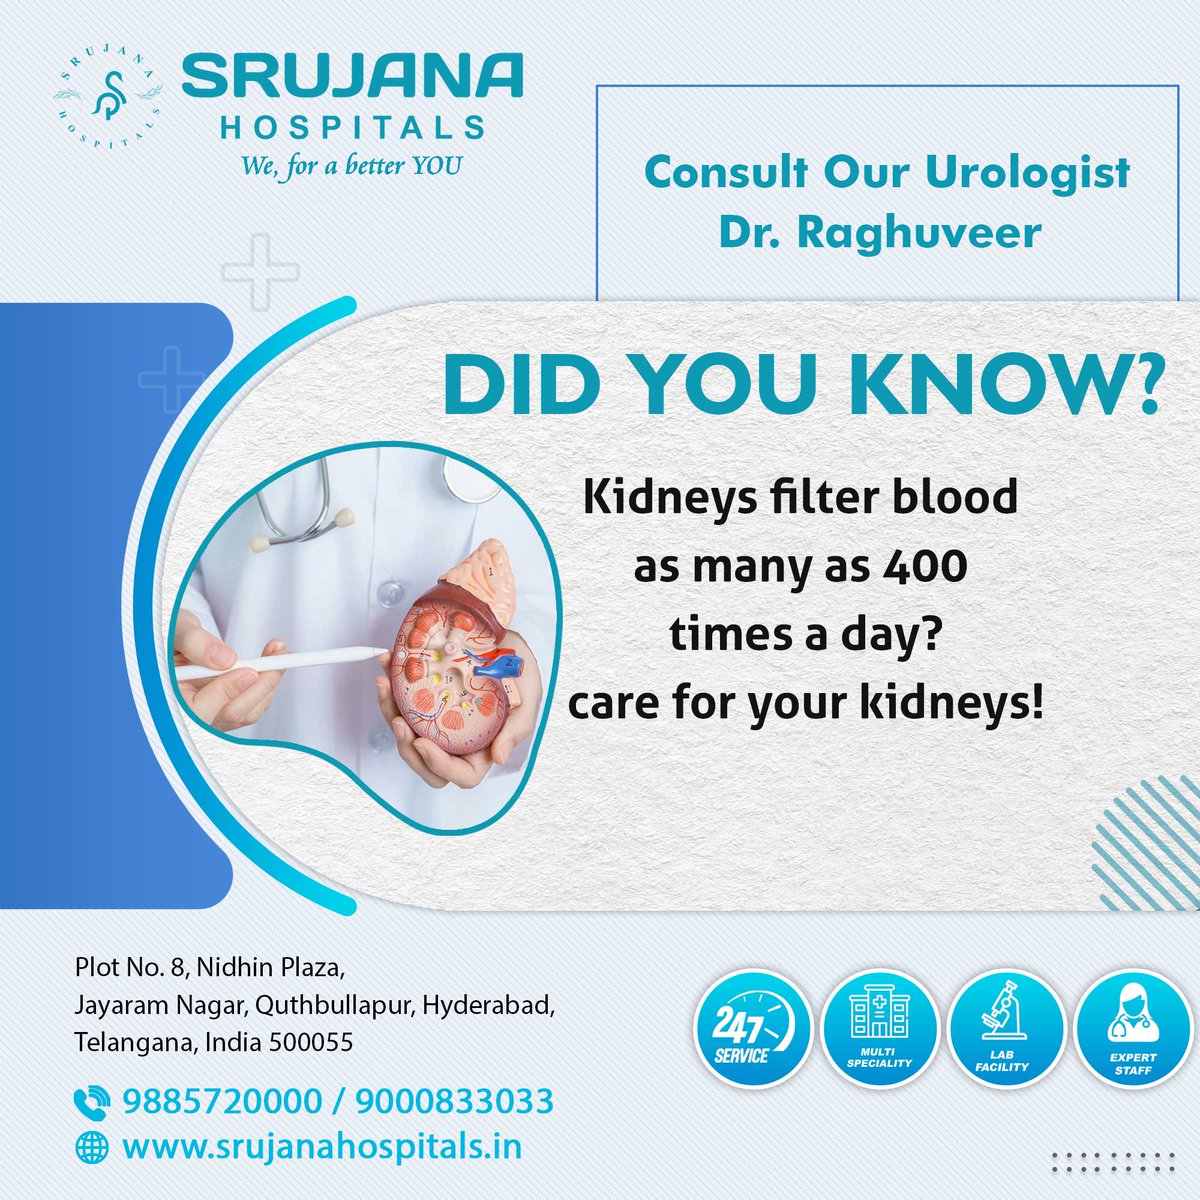 Did You Know?

📲 : 𝟗𝟖𝟖𝟓𝟕𝟐𝟎𝟎𝟎𝟎/𝟗𝟎𝟎𝟎𝟖𝟑𝟑𝟎𝟑𝟑
🌐: srujanahospitals.in

#DidYouKnow #DidYouKnowThis #HaveYouHeard #FiltersBlood #HealthyKidneys #DrinkWater #KidneyHealth #Srujanahospitals #Quthbullapur #Hyderabad